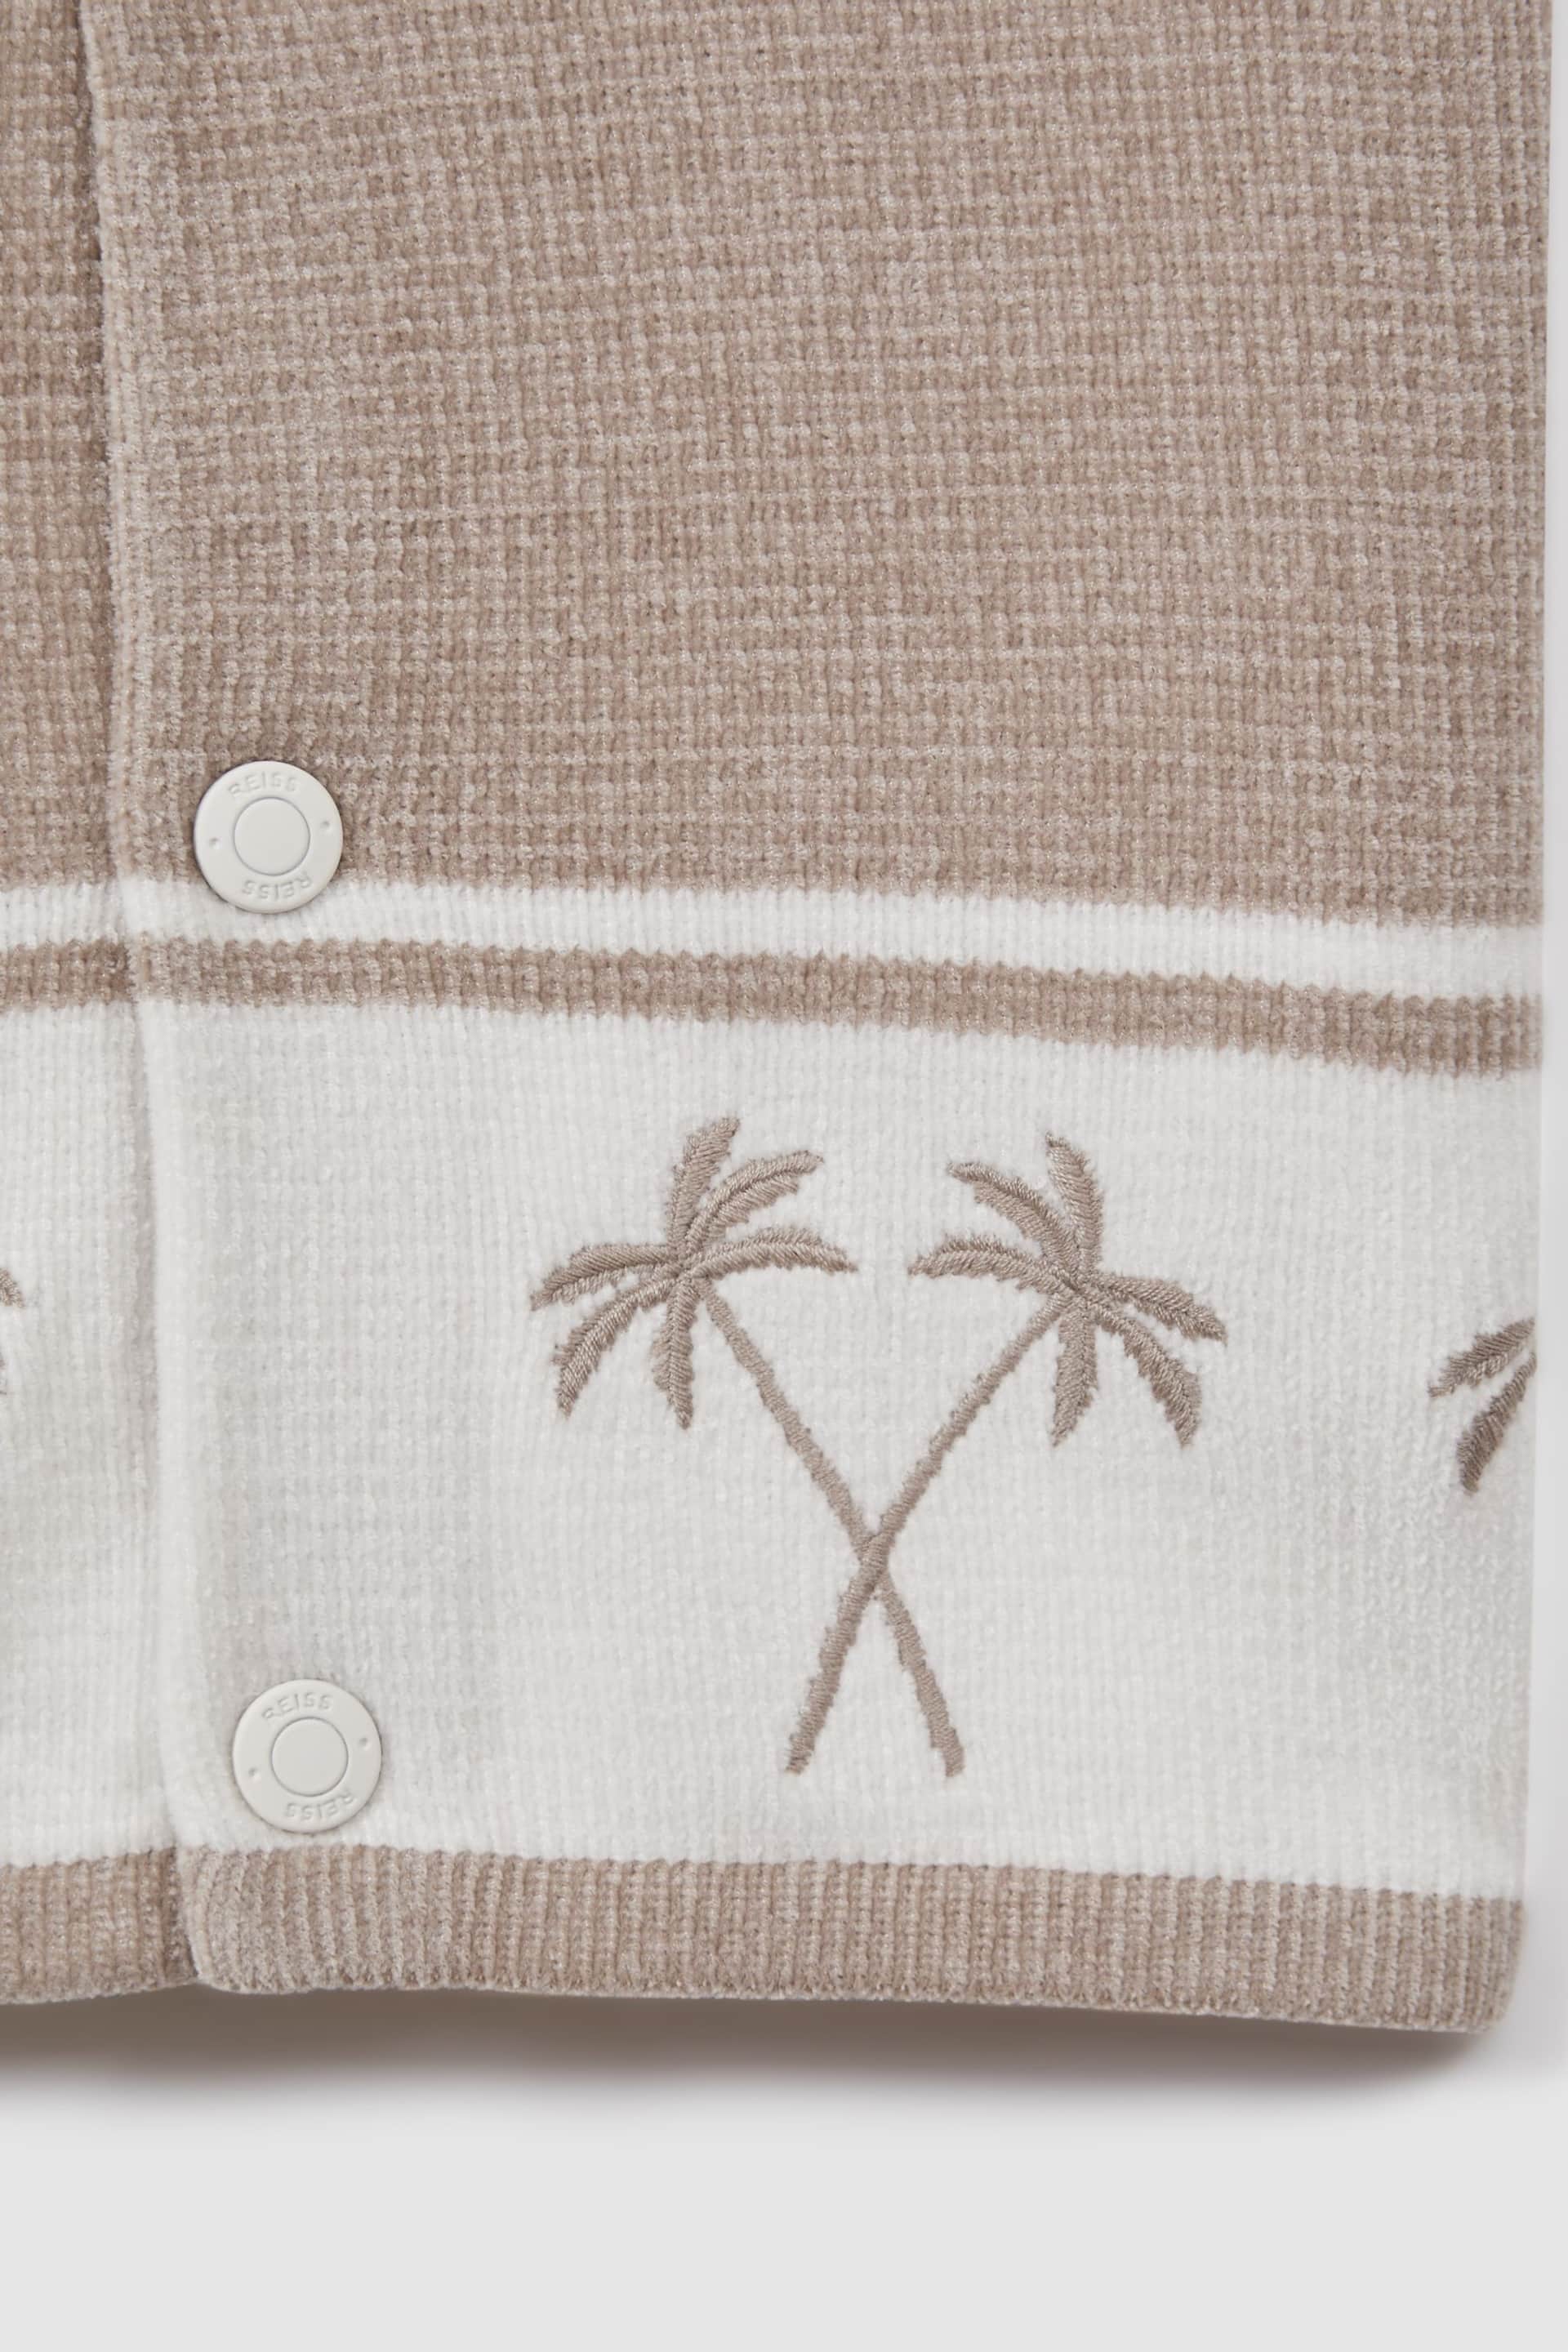 Reiss Taupe/Optic White Bowler Junior Velour Embroidered Striped Shirt - Image 4 of 4